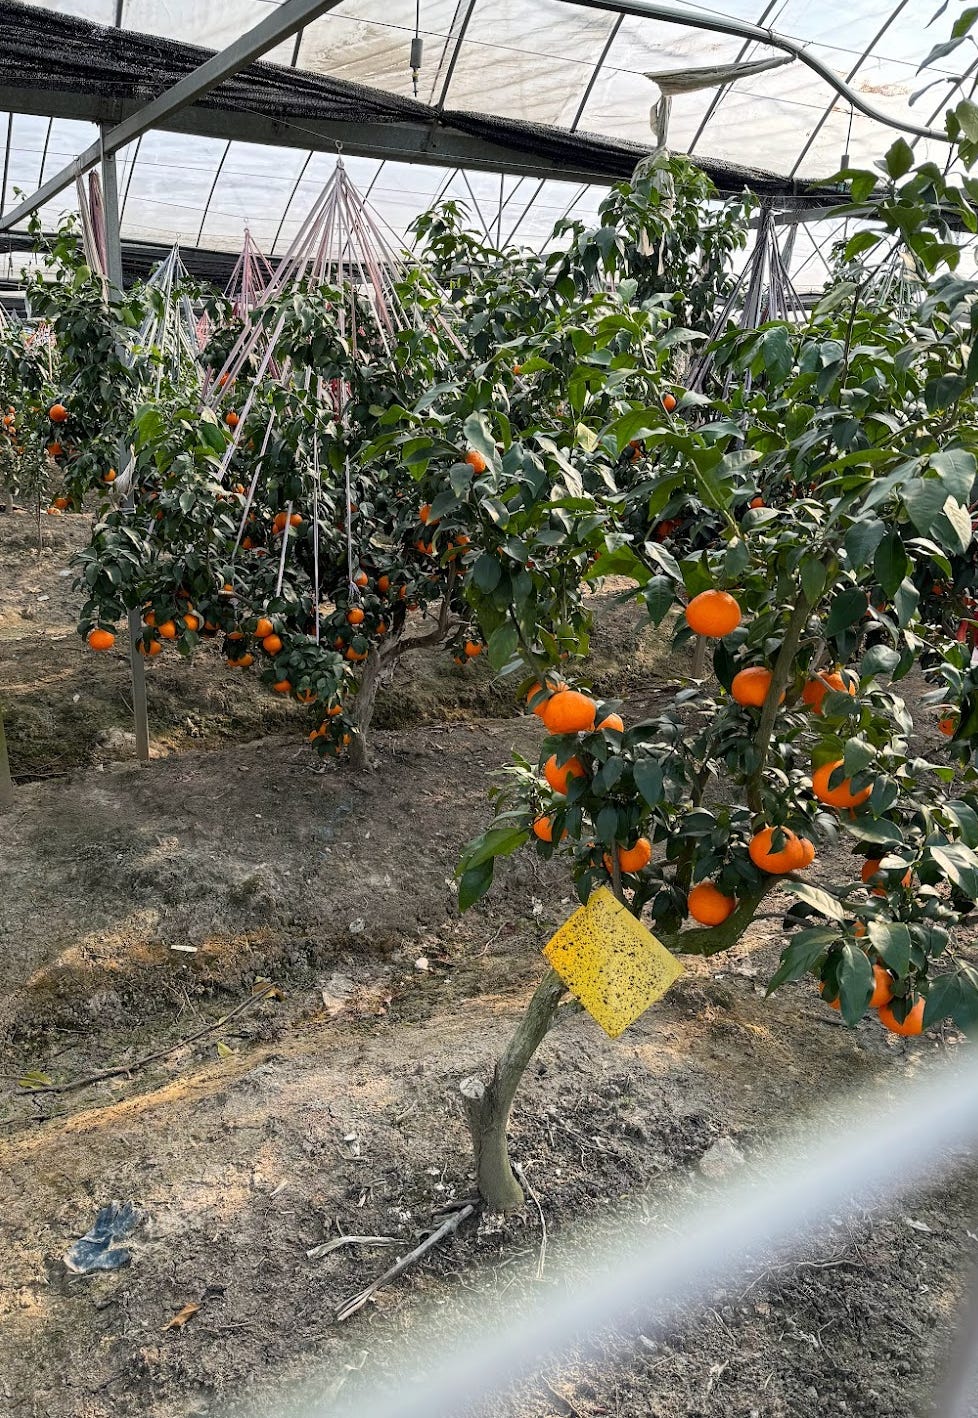 Oranges with branches held up by rope